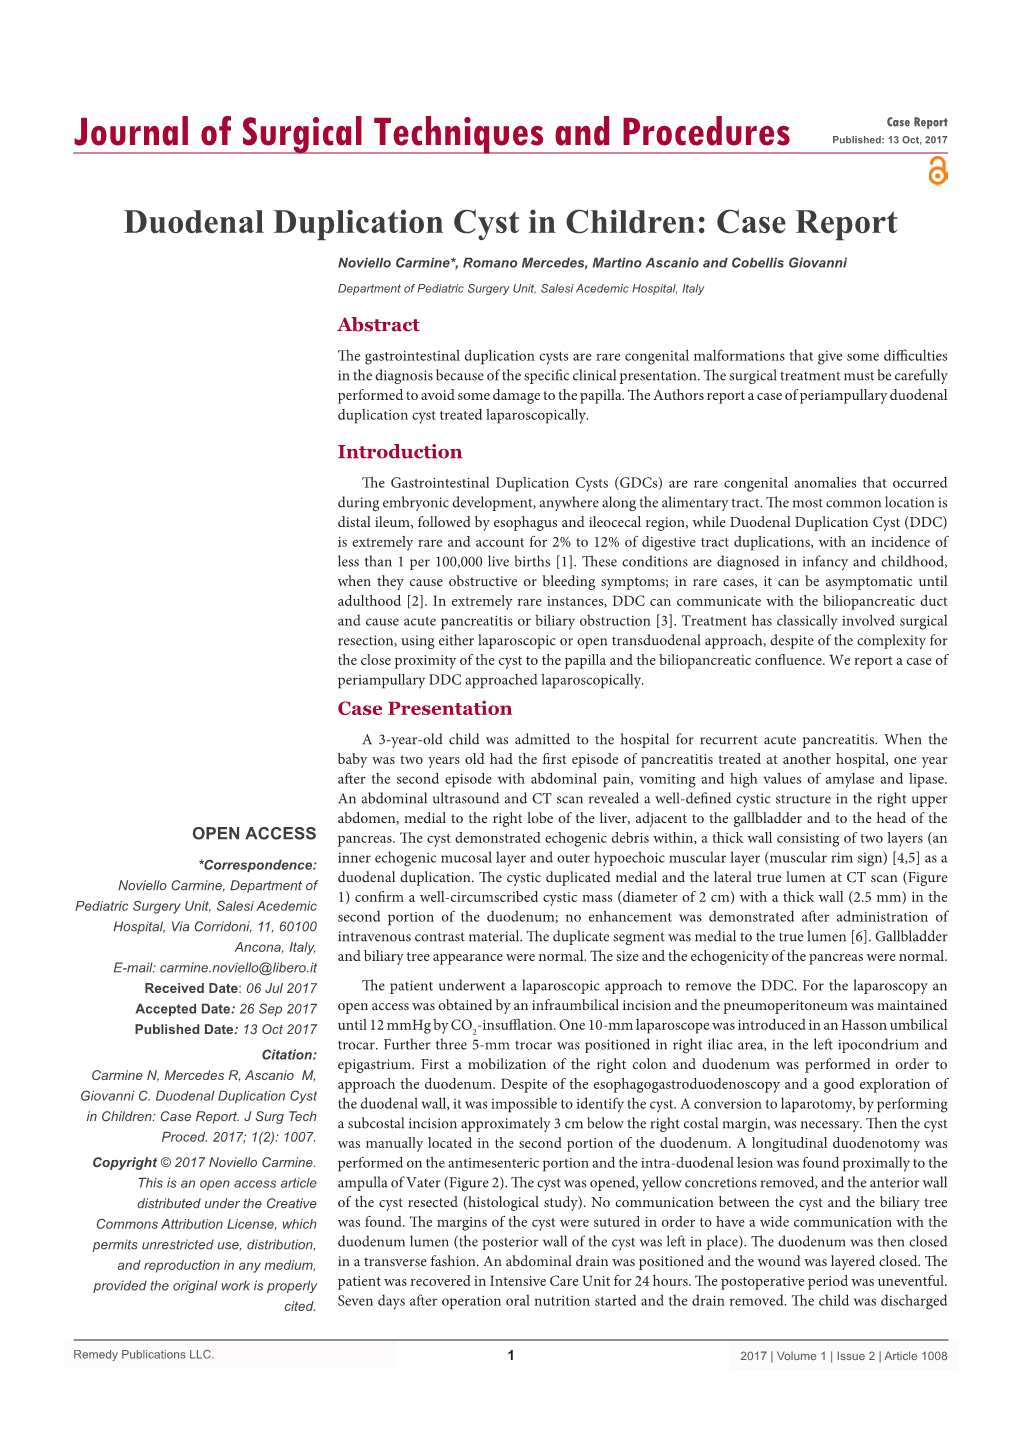 Duodenal Duplication Cyst in Children: Case Report